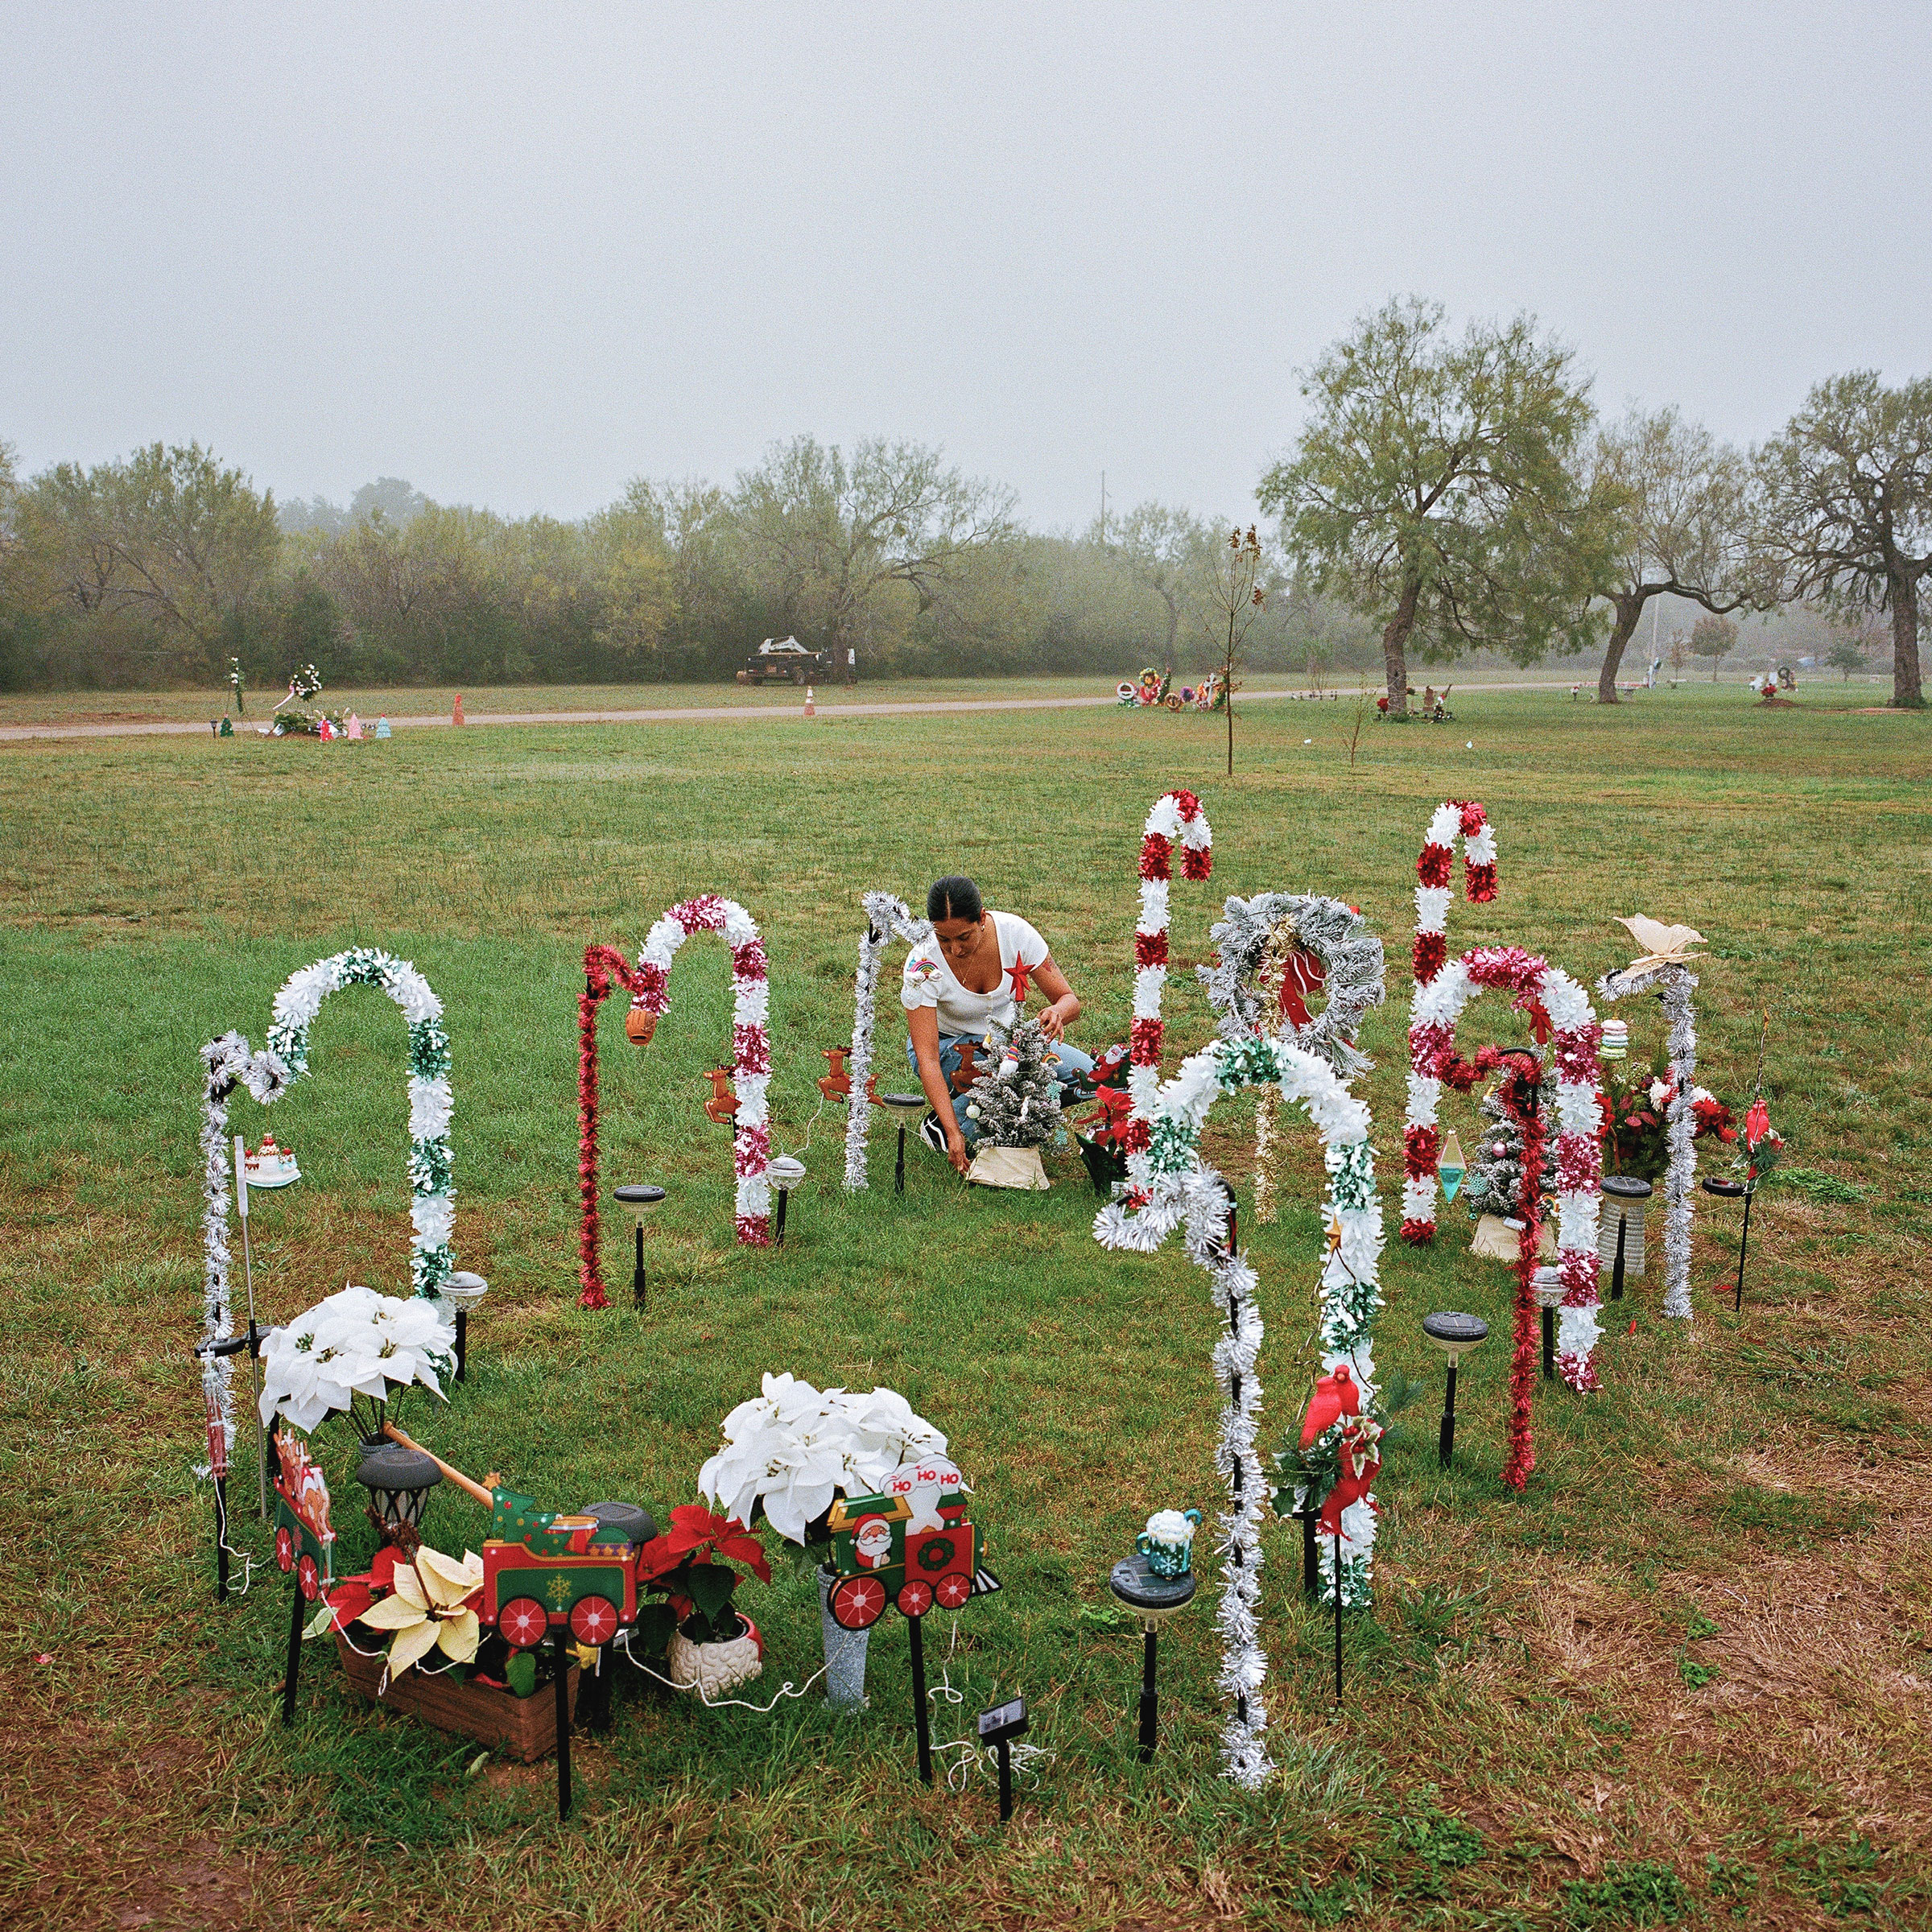 Kimberly visits Lexi’s gravesite, which they decorated for the holidays. (Christopher Lee for TIME)